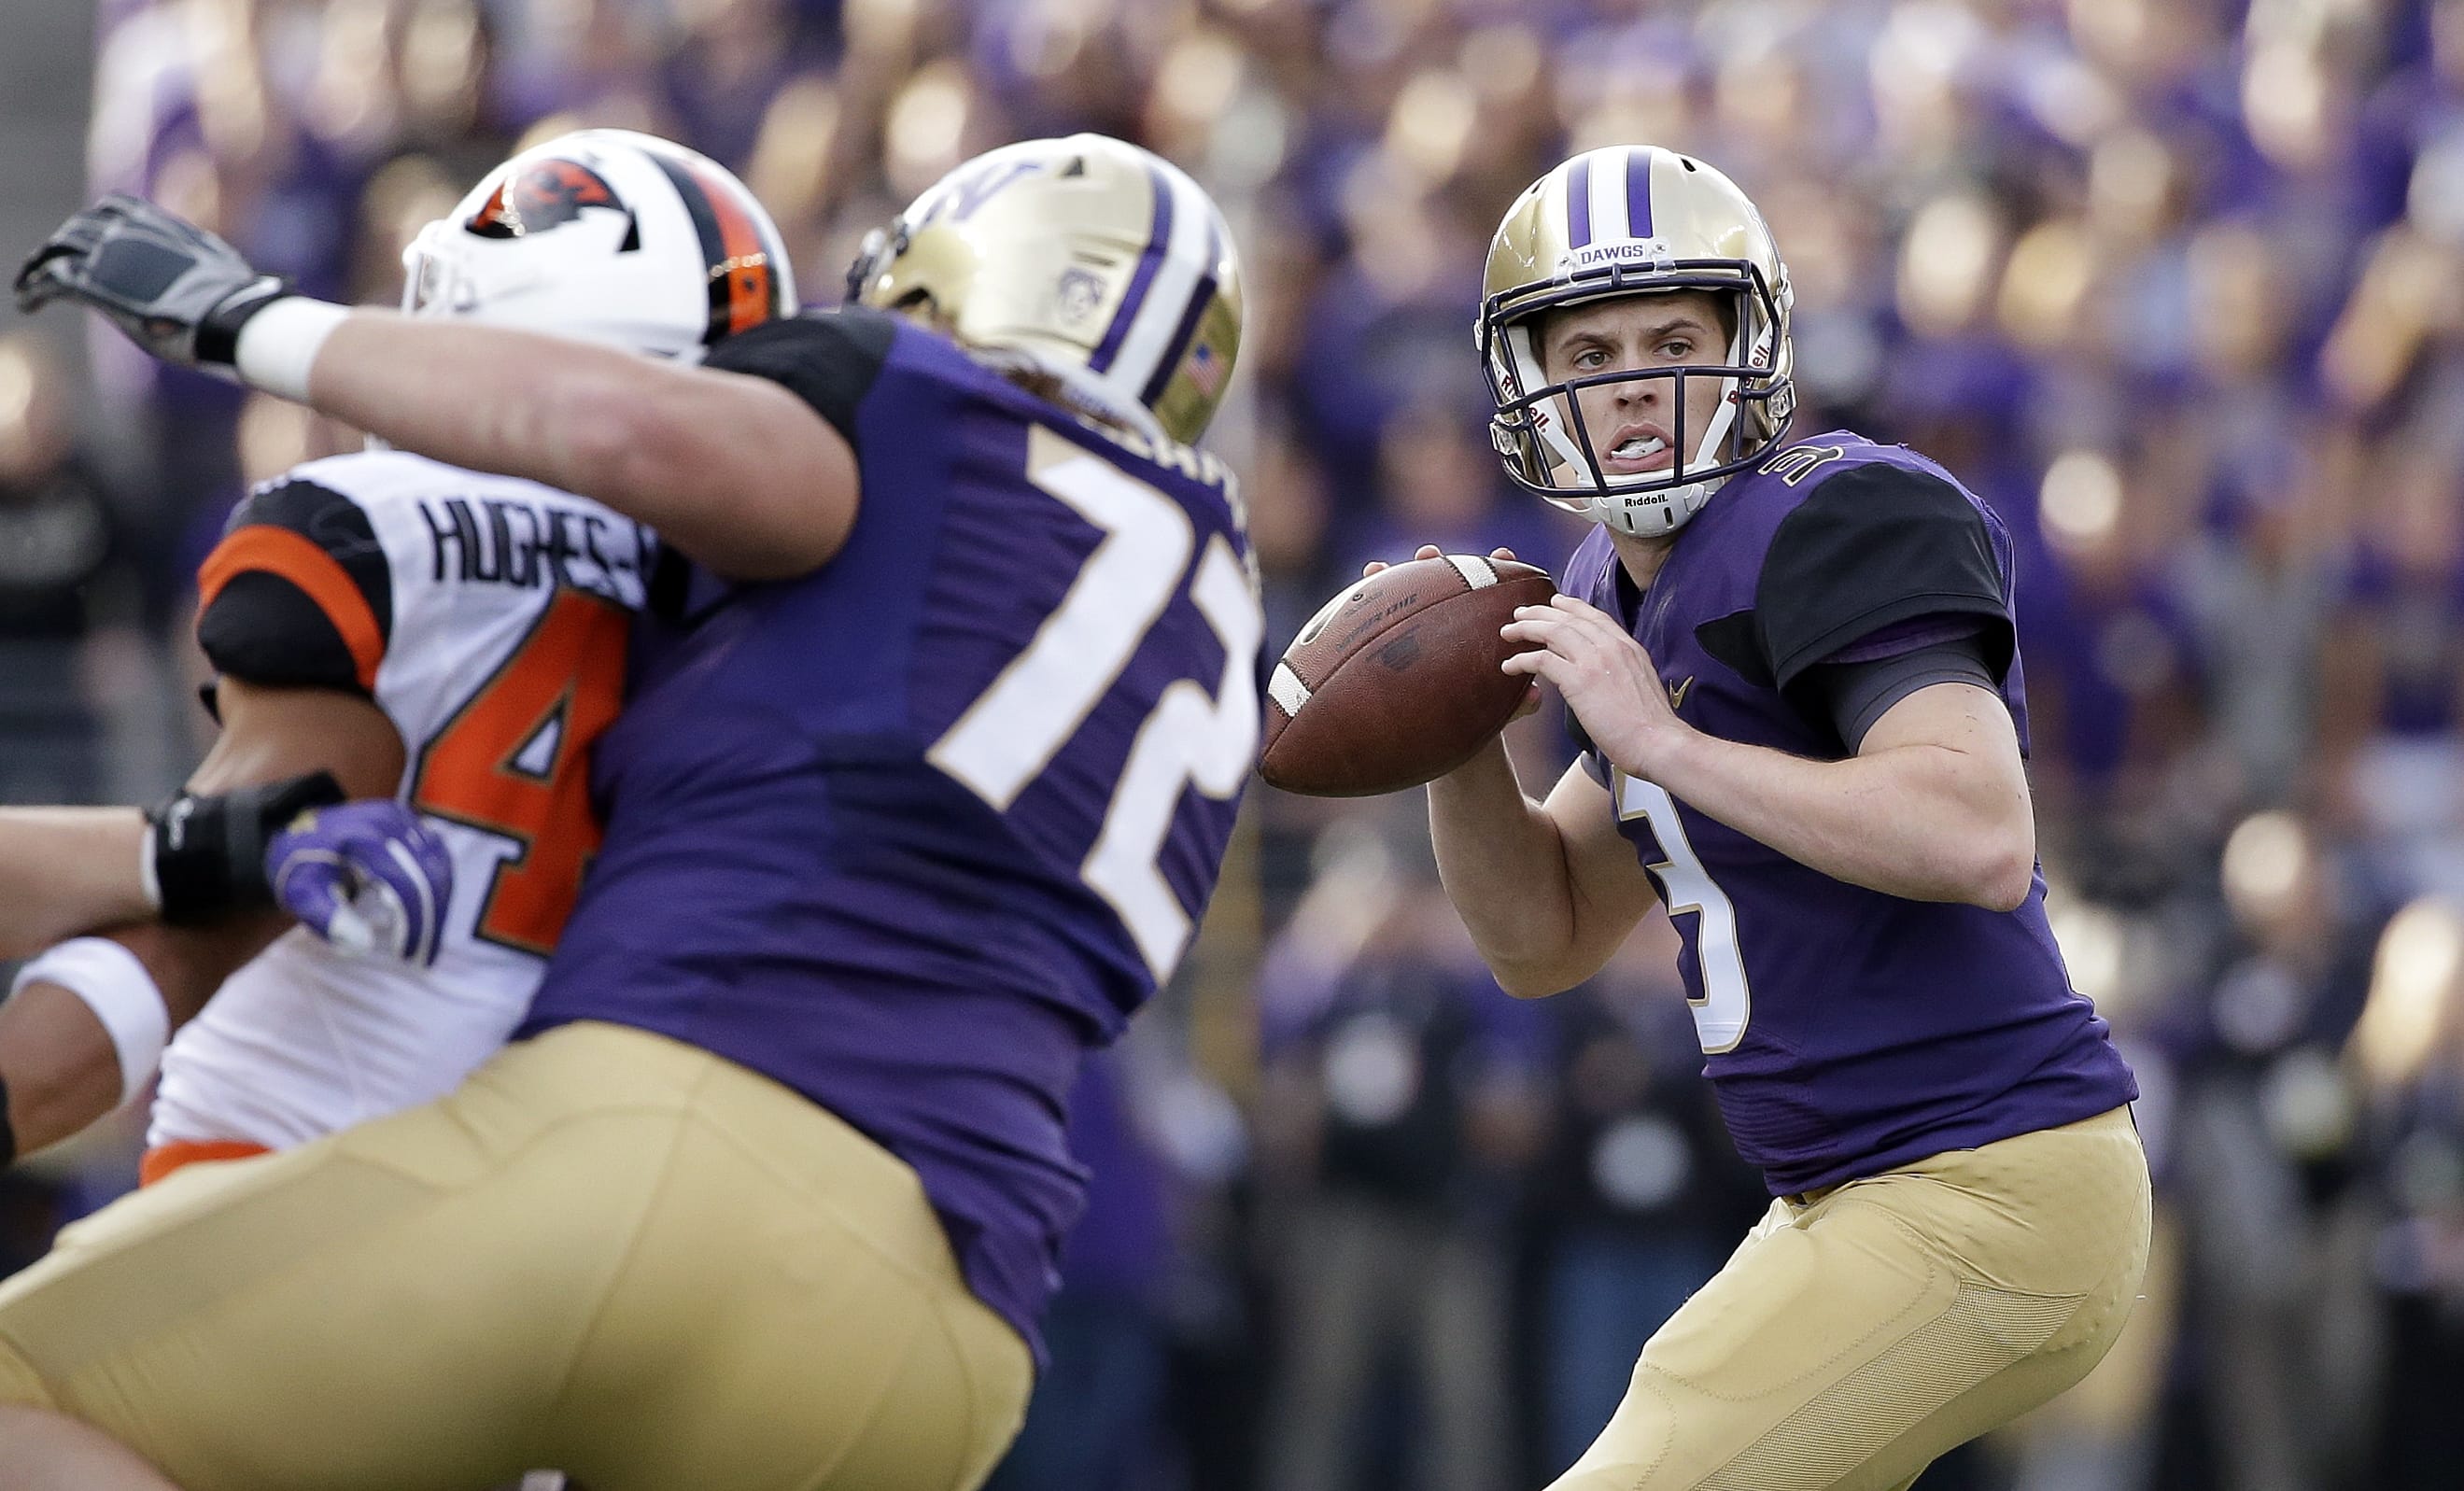 Washington quarterback Jake Browning drops back to throw a pass that led to a touchdown against Oregon State in the minutes of an NCAA college football game Saturday, Oct. 22, 2016, in Seattle.